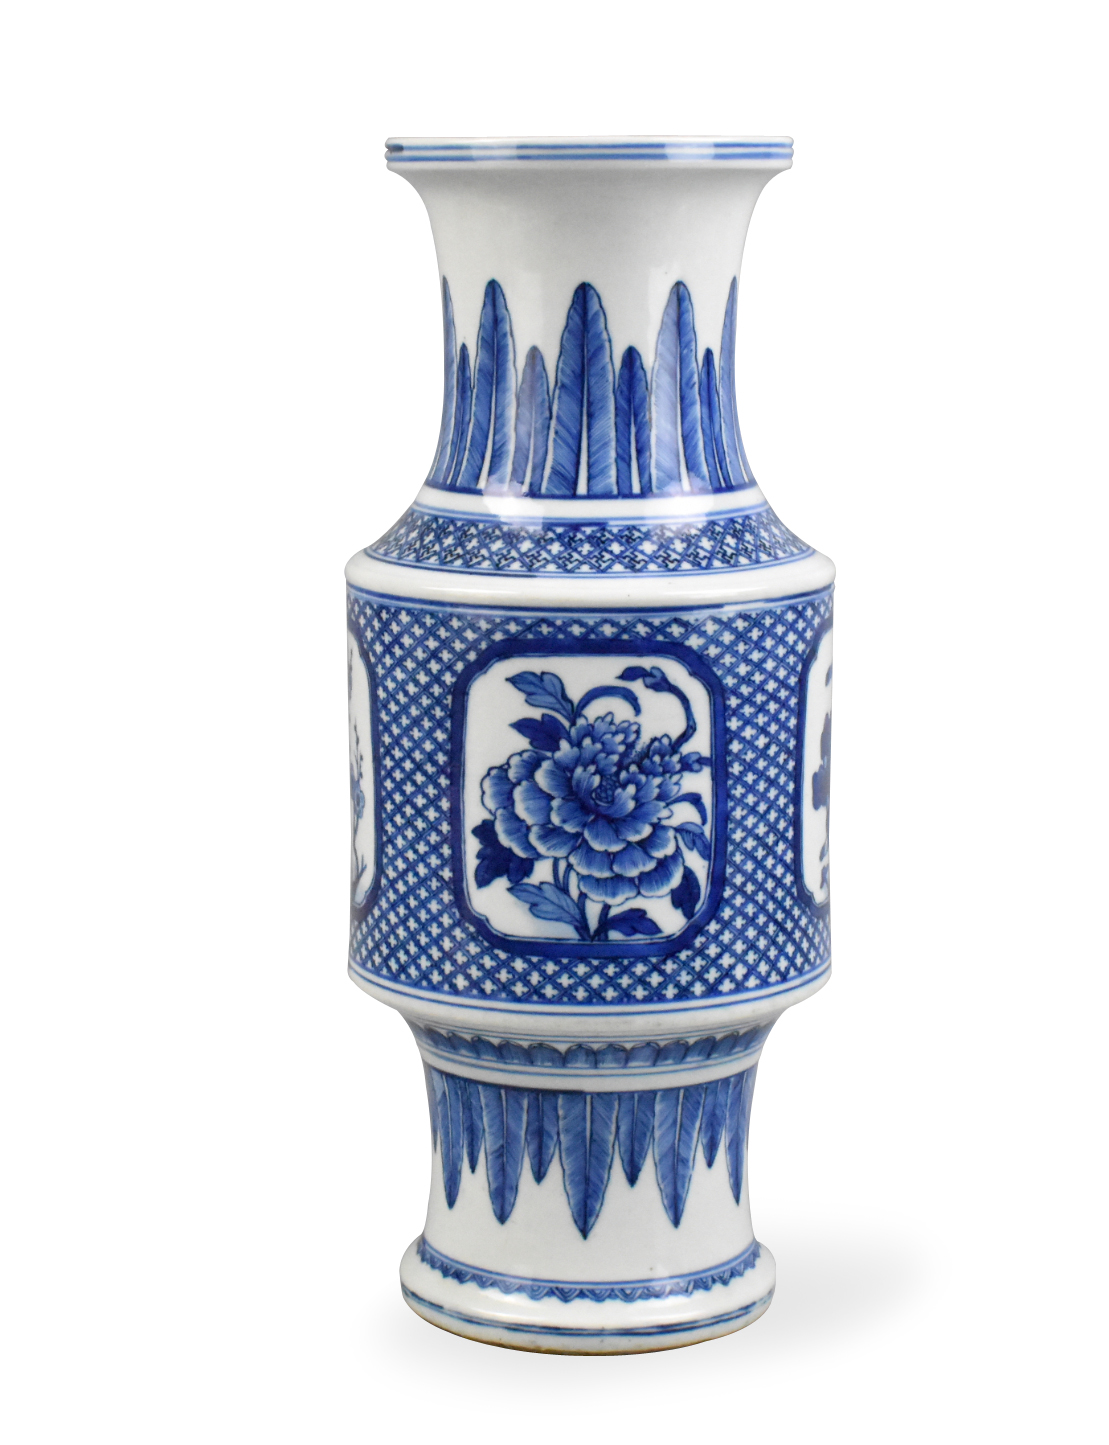 CHINESE BLUE & WHITE FLORAL VASE,19TH